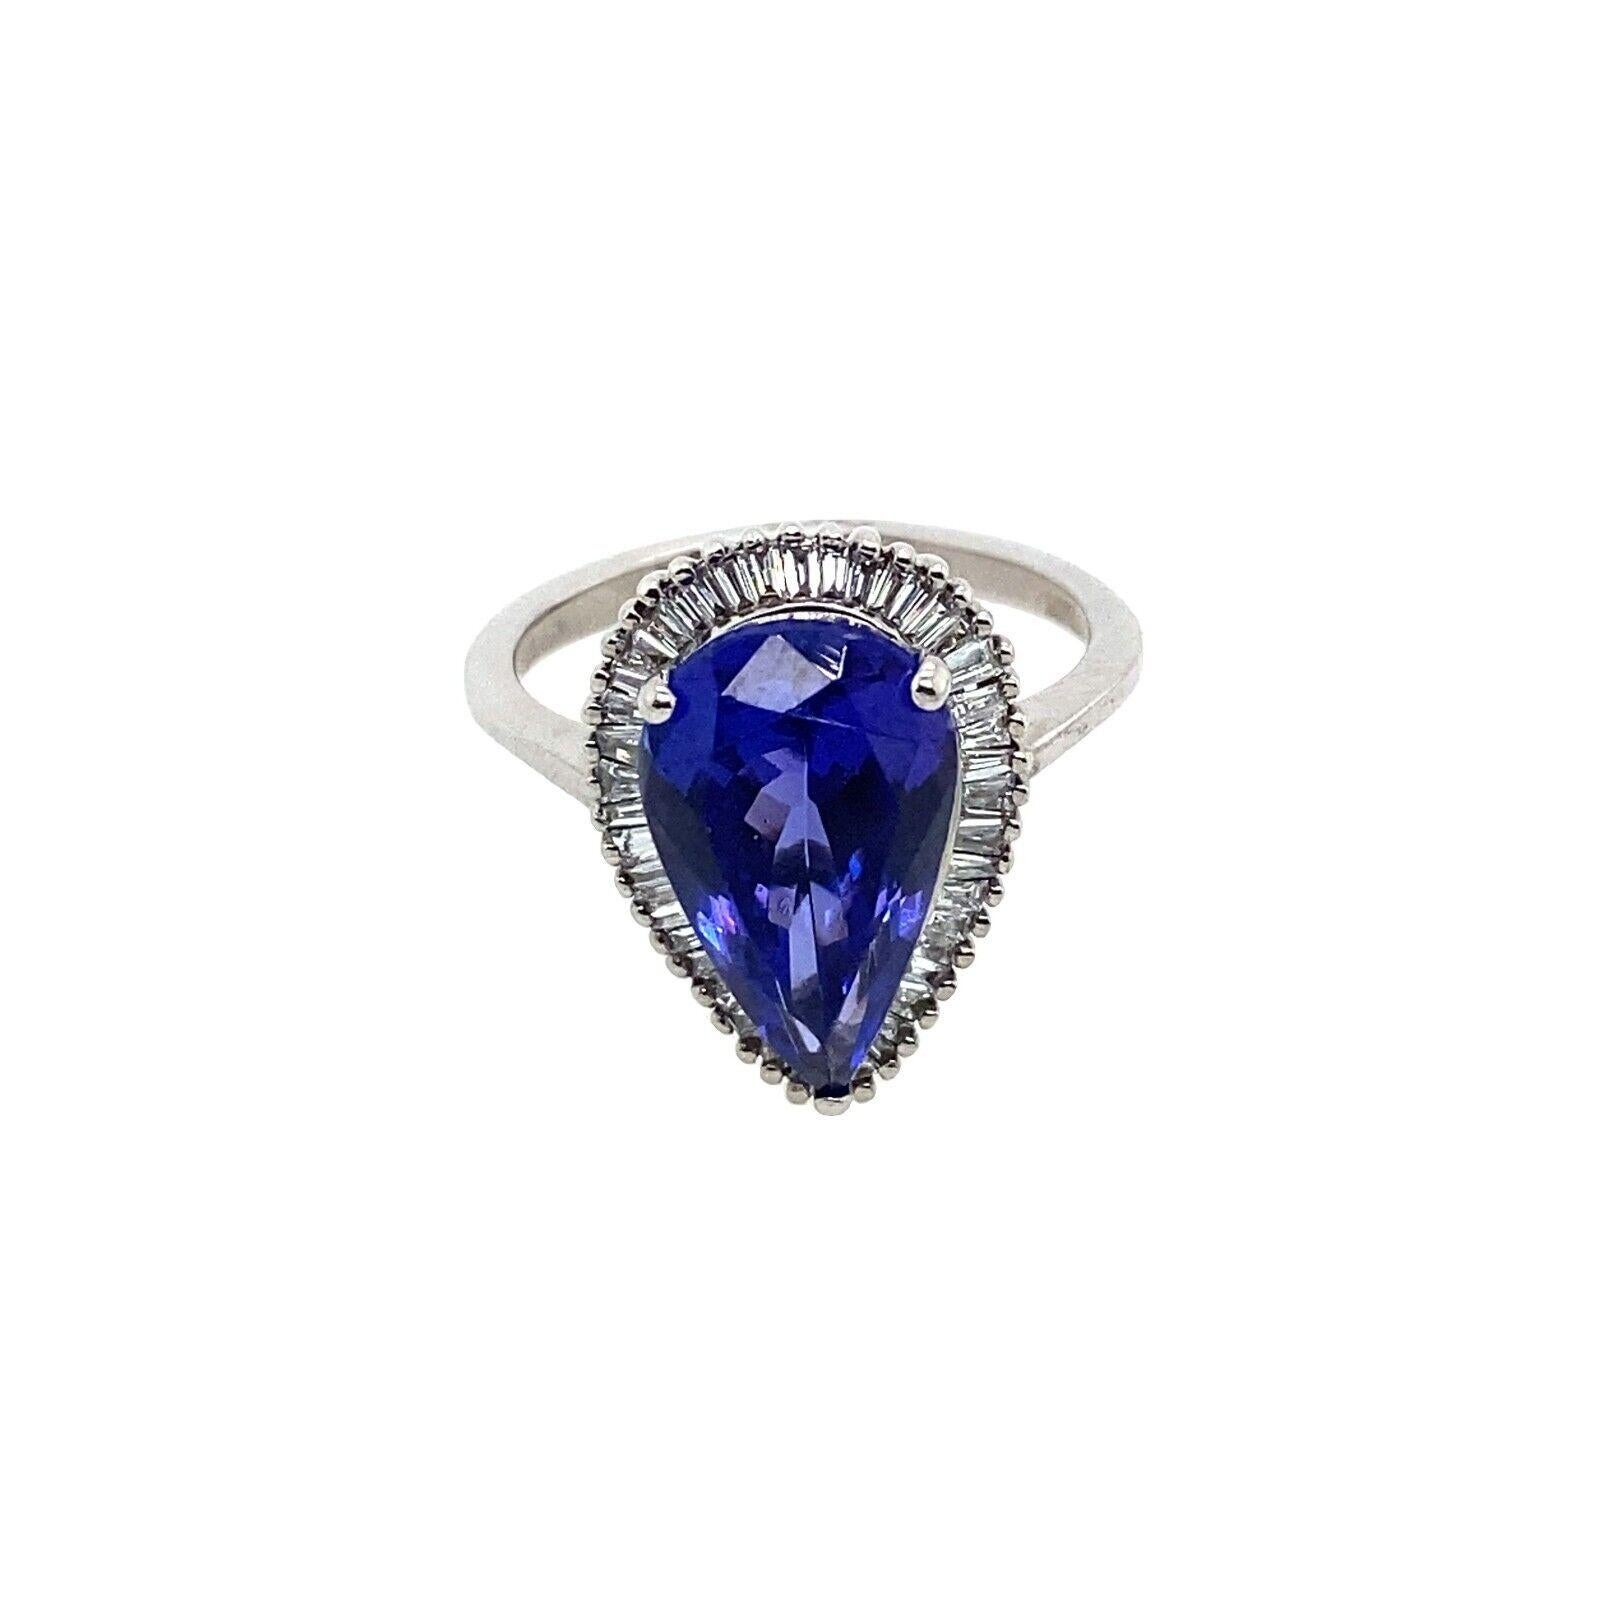 This magnificent ring is a perfect combination of elegance, luxury and simplicity. The pear shape Tanzanite at the centre is surrounded by  44 sparkling baguette Diamonds in very unique Platinum design.

Additional Information:
Total Diamond Weight: